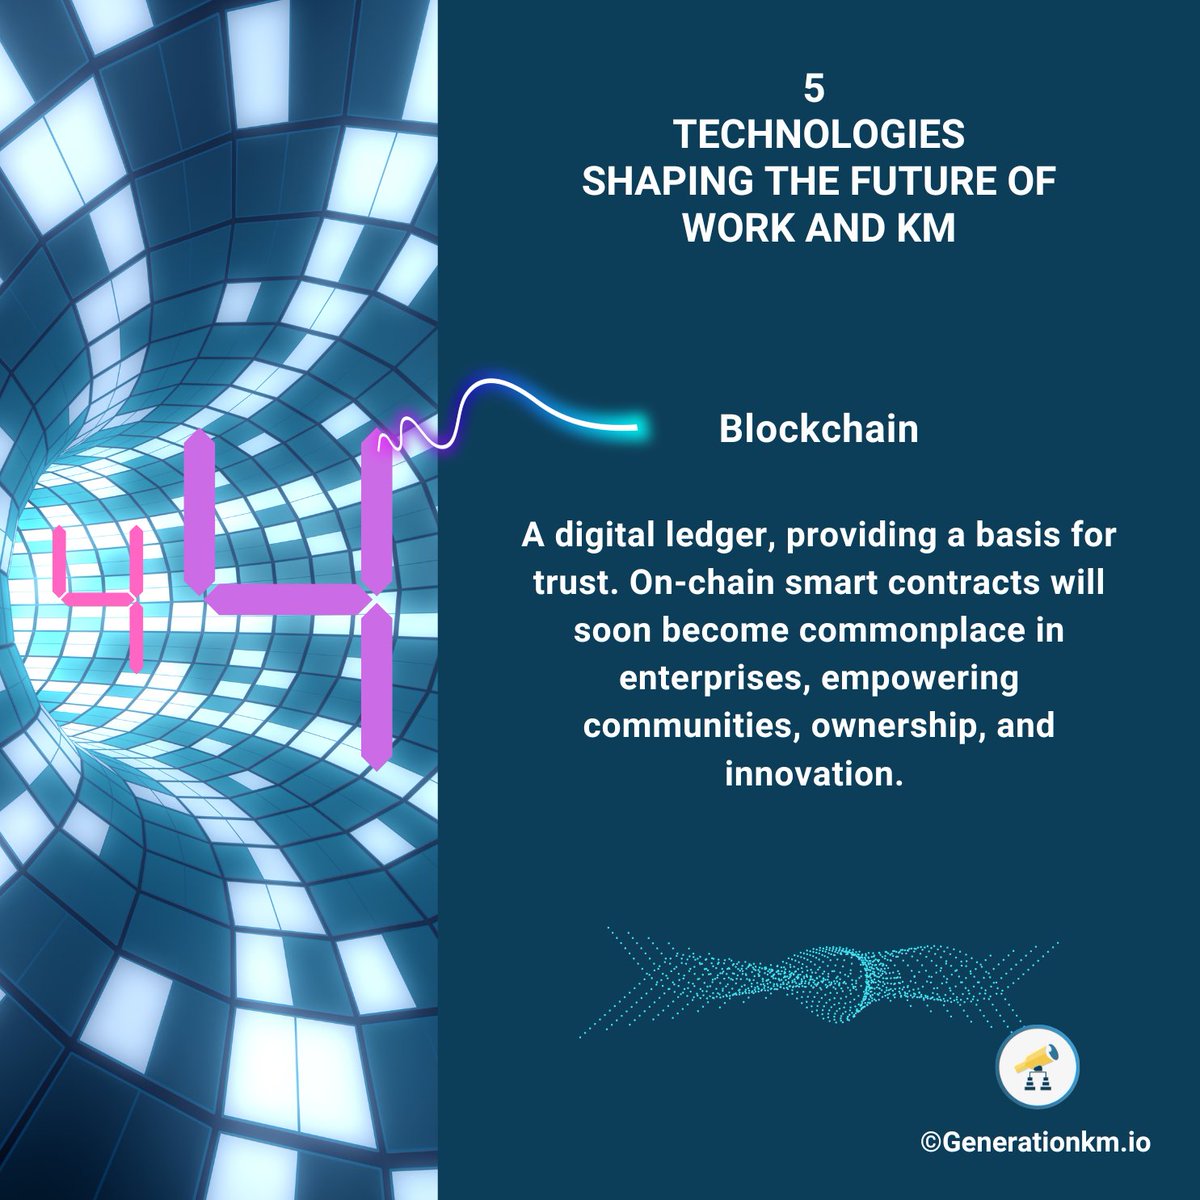 🔭 5 technologies shaping the #futureofwork and #knowledgemanagement. #KM 

#Blockchain - > A digital #ledger, providing a basis for trust. On-chain #smartcontracts will soon become commonplace in enterprises, empowering communities, #ownership, and #innovation. 

#KM40…